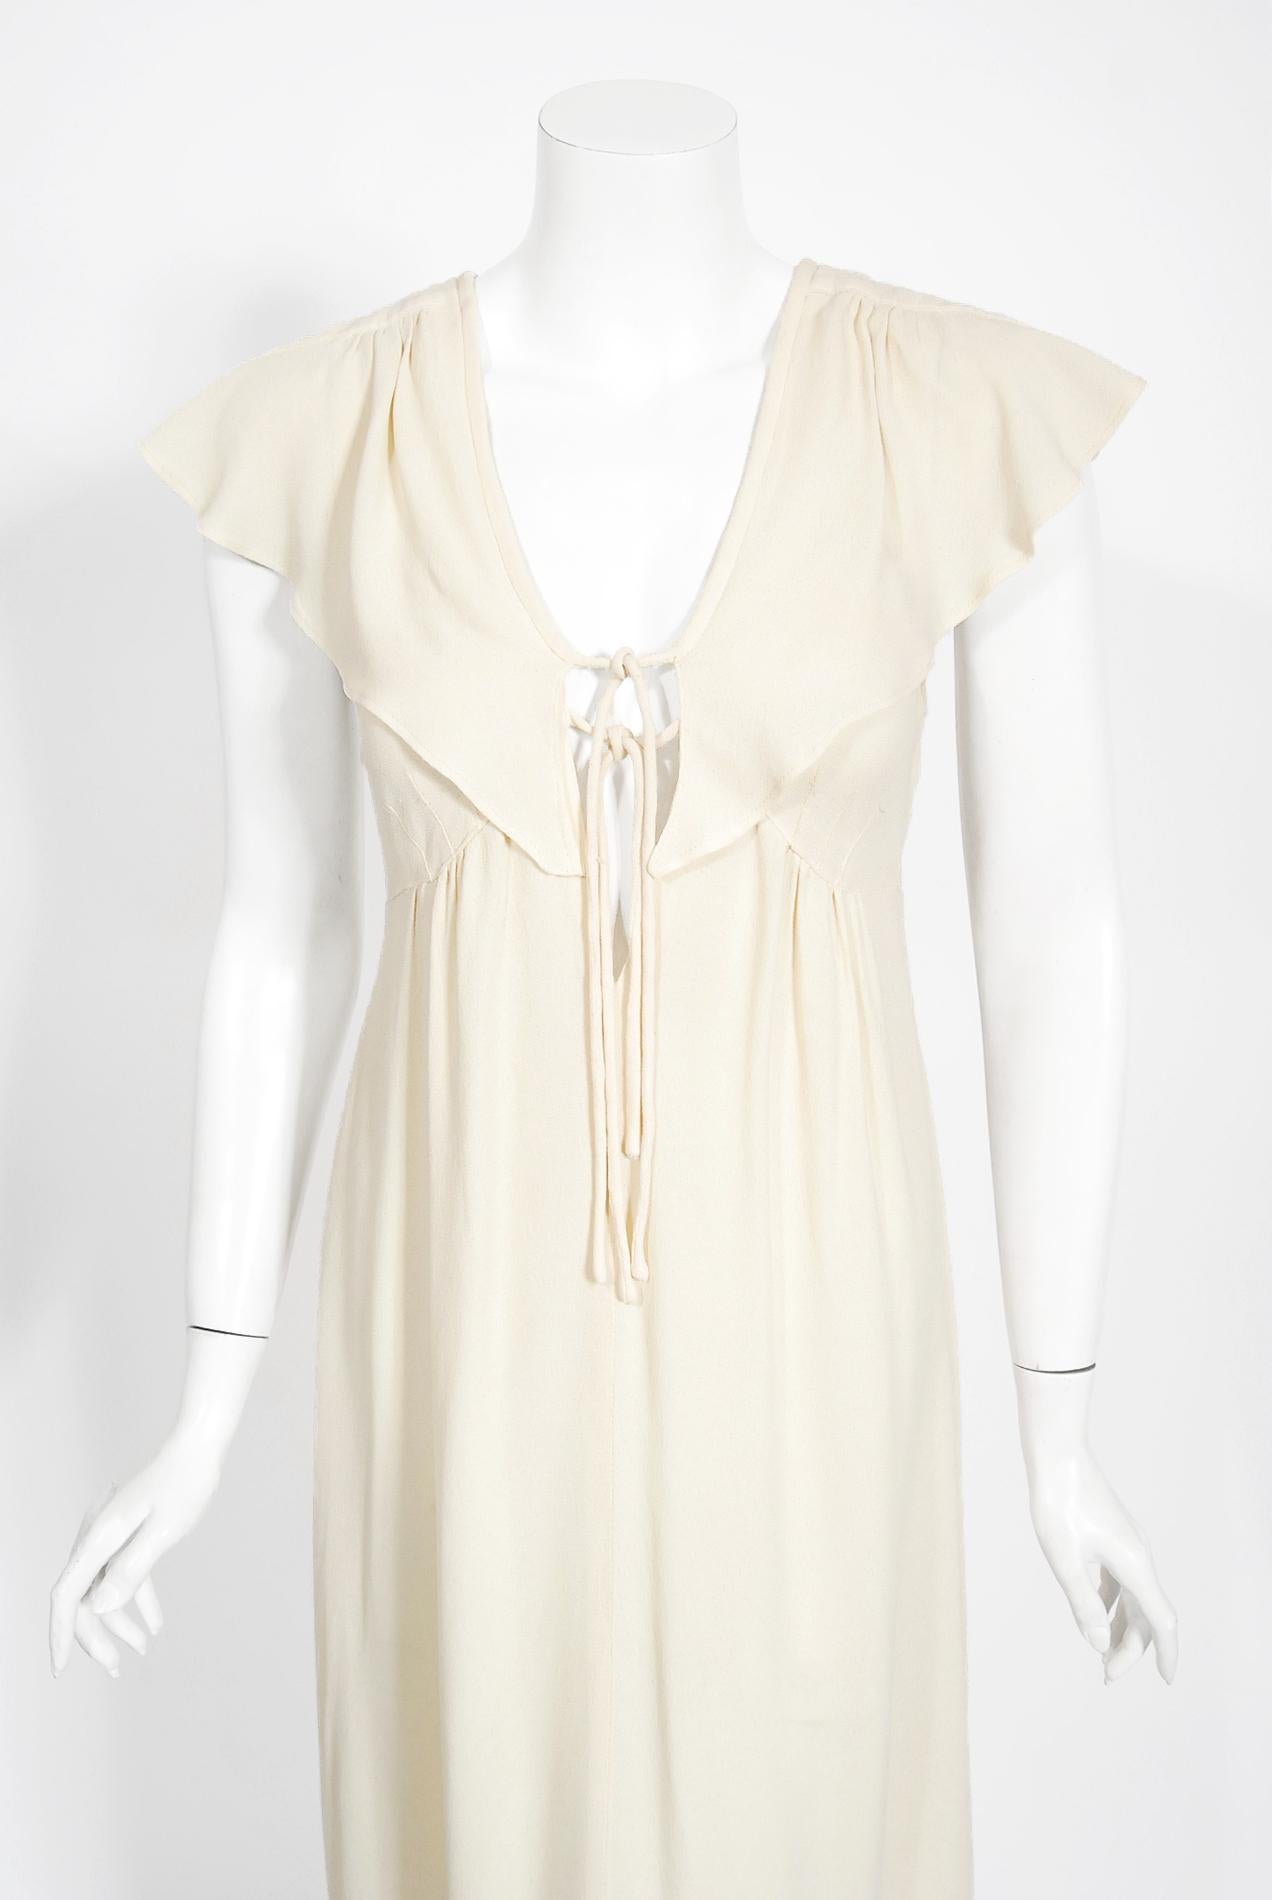 An ethereal and totally timeless Radley of London ivory moss-crepe flutter sleeve capelet dress dating back to the mid 1970's. Radley was a British clothing company that started in the late 1960's and is best known for its association with the